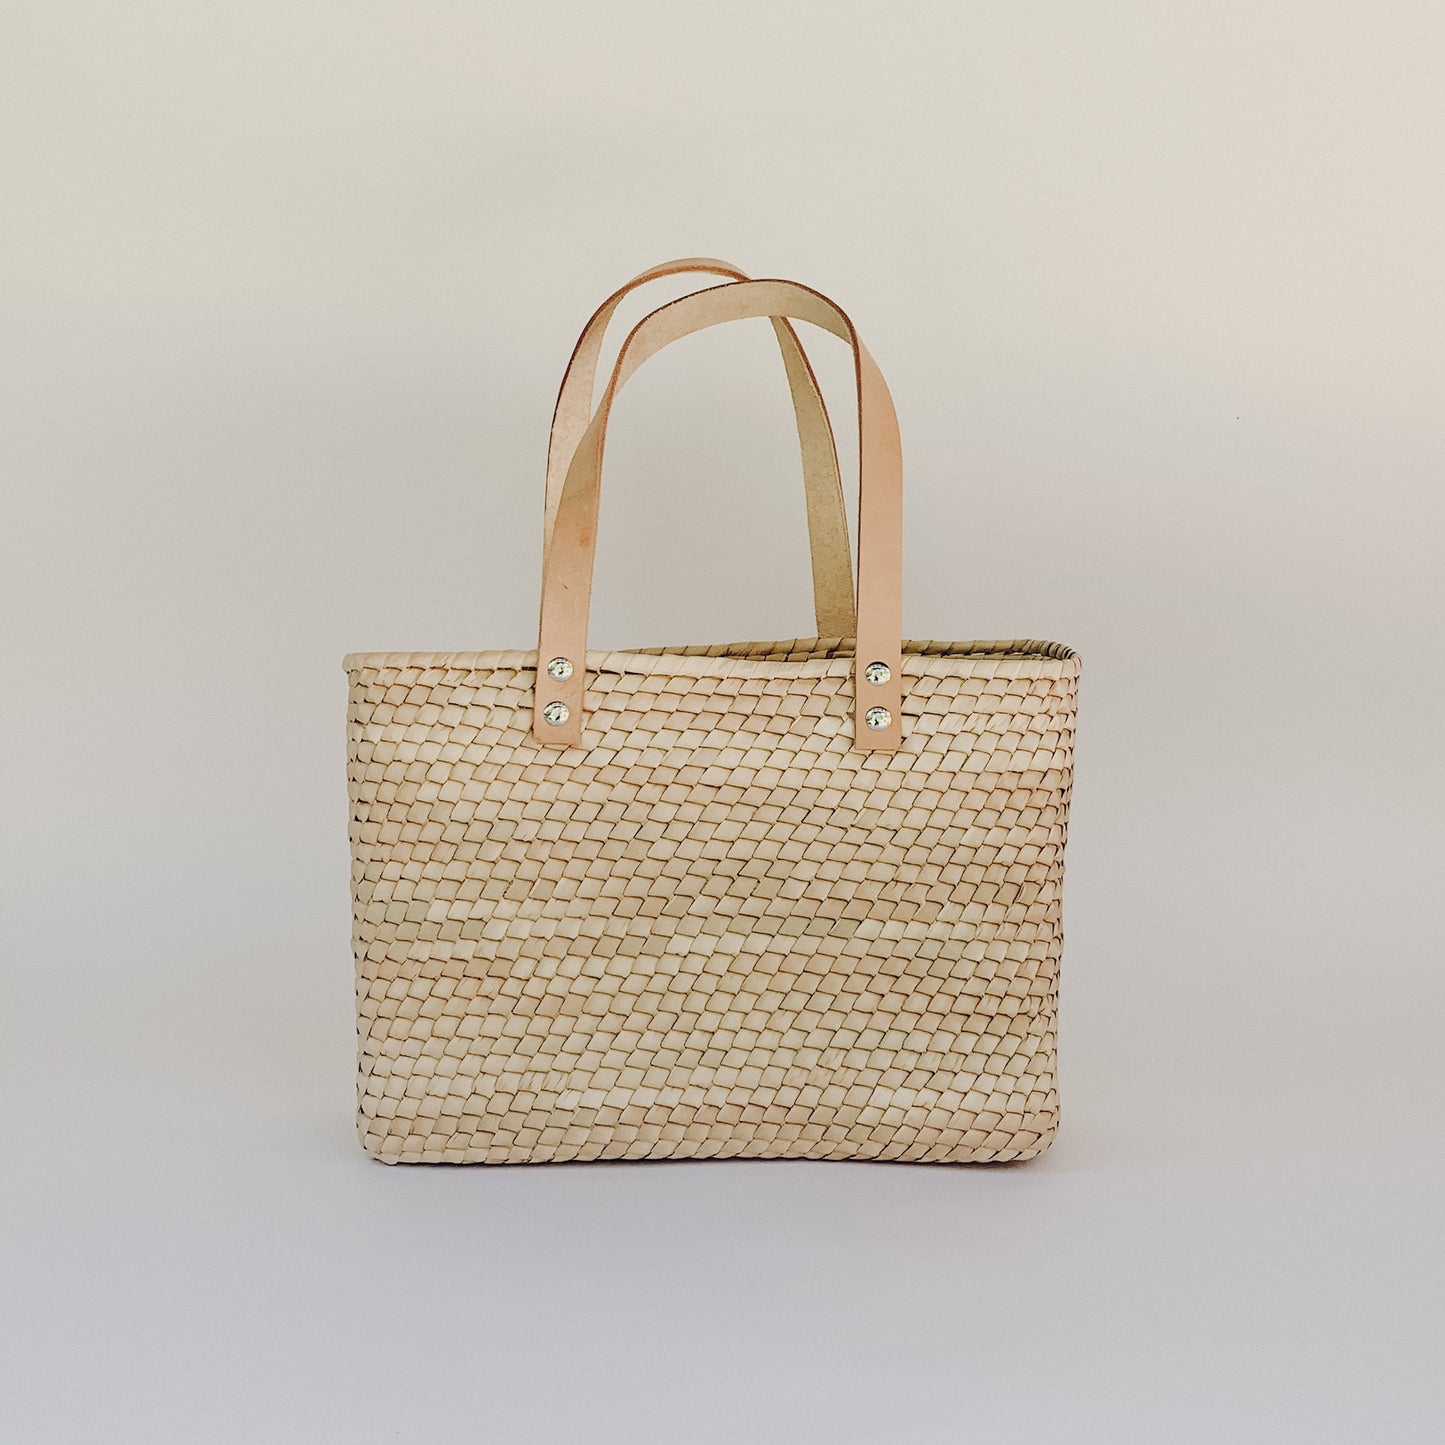 Tulum Straw Tote with Leather